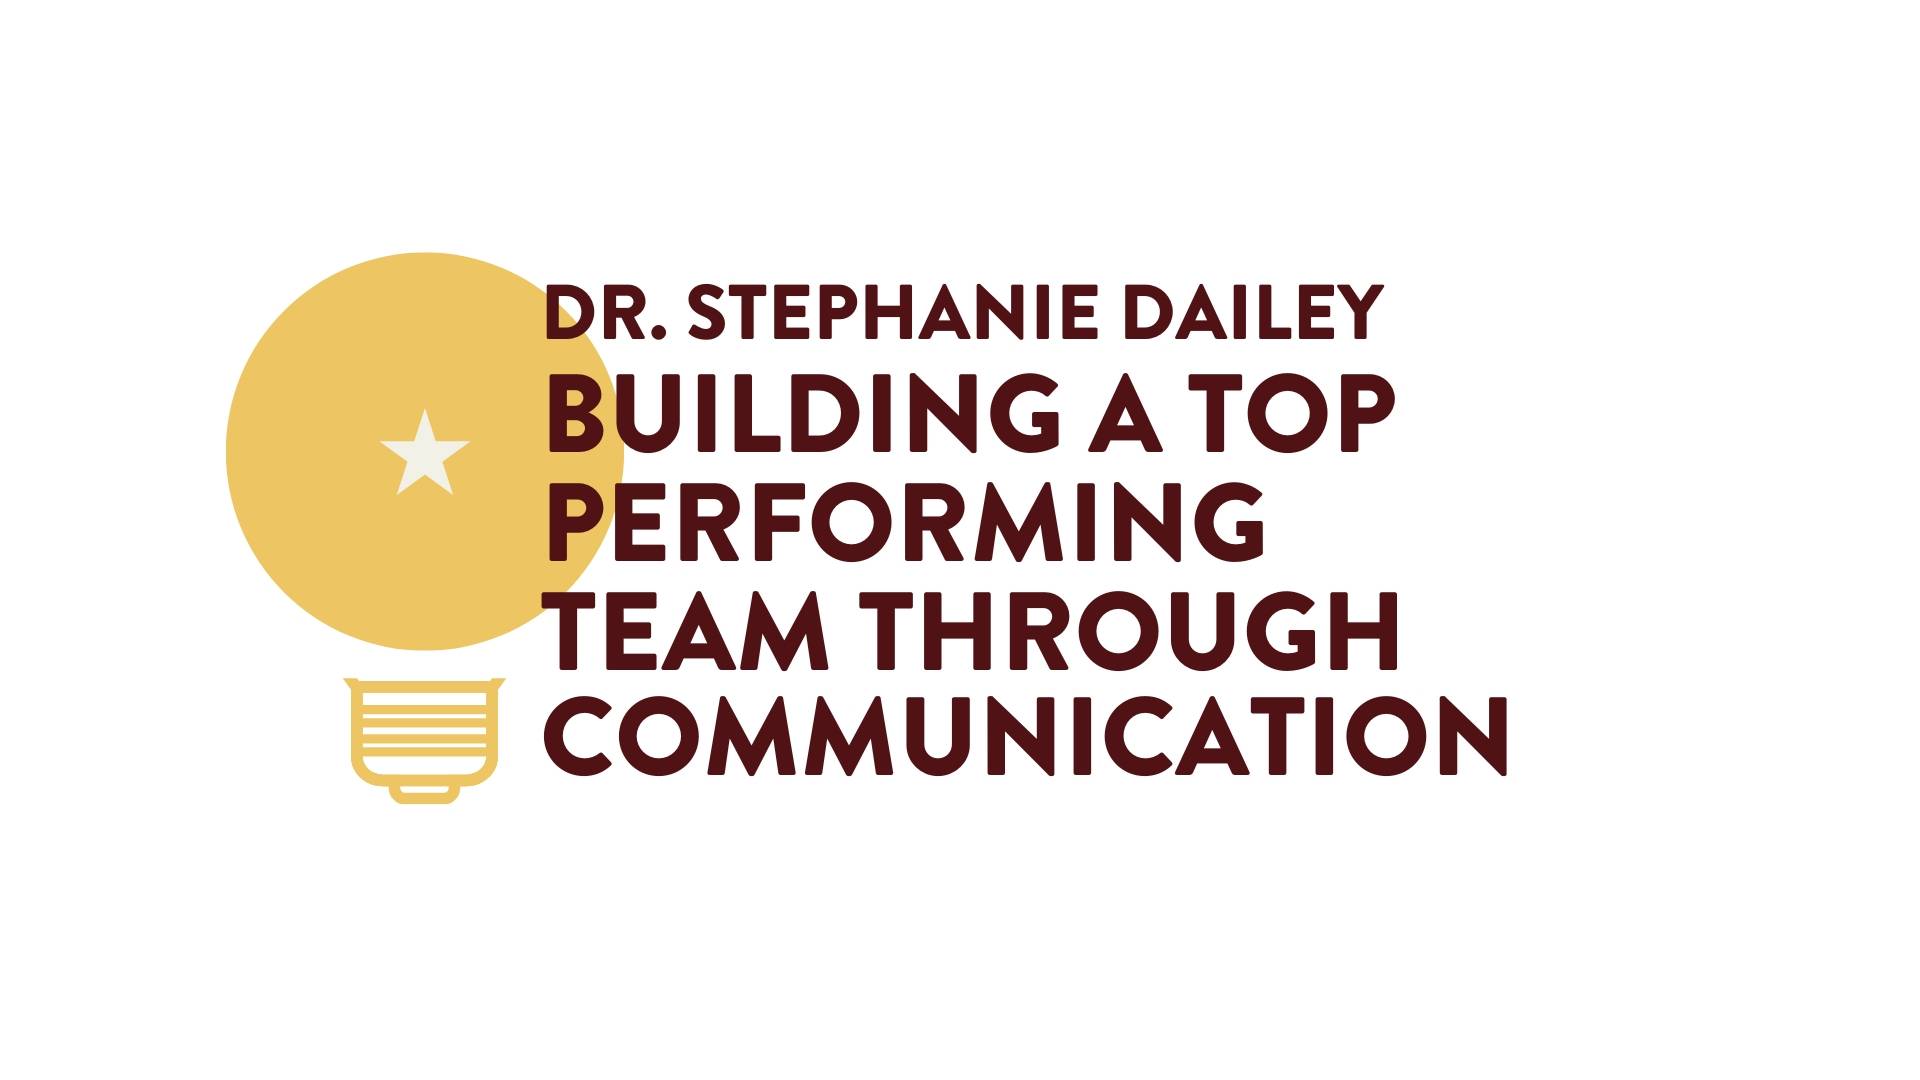 Building a Top Performing Team Through Communication